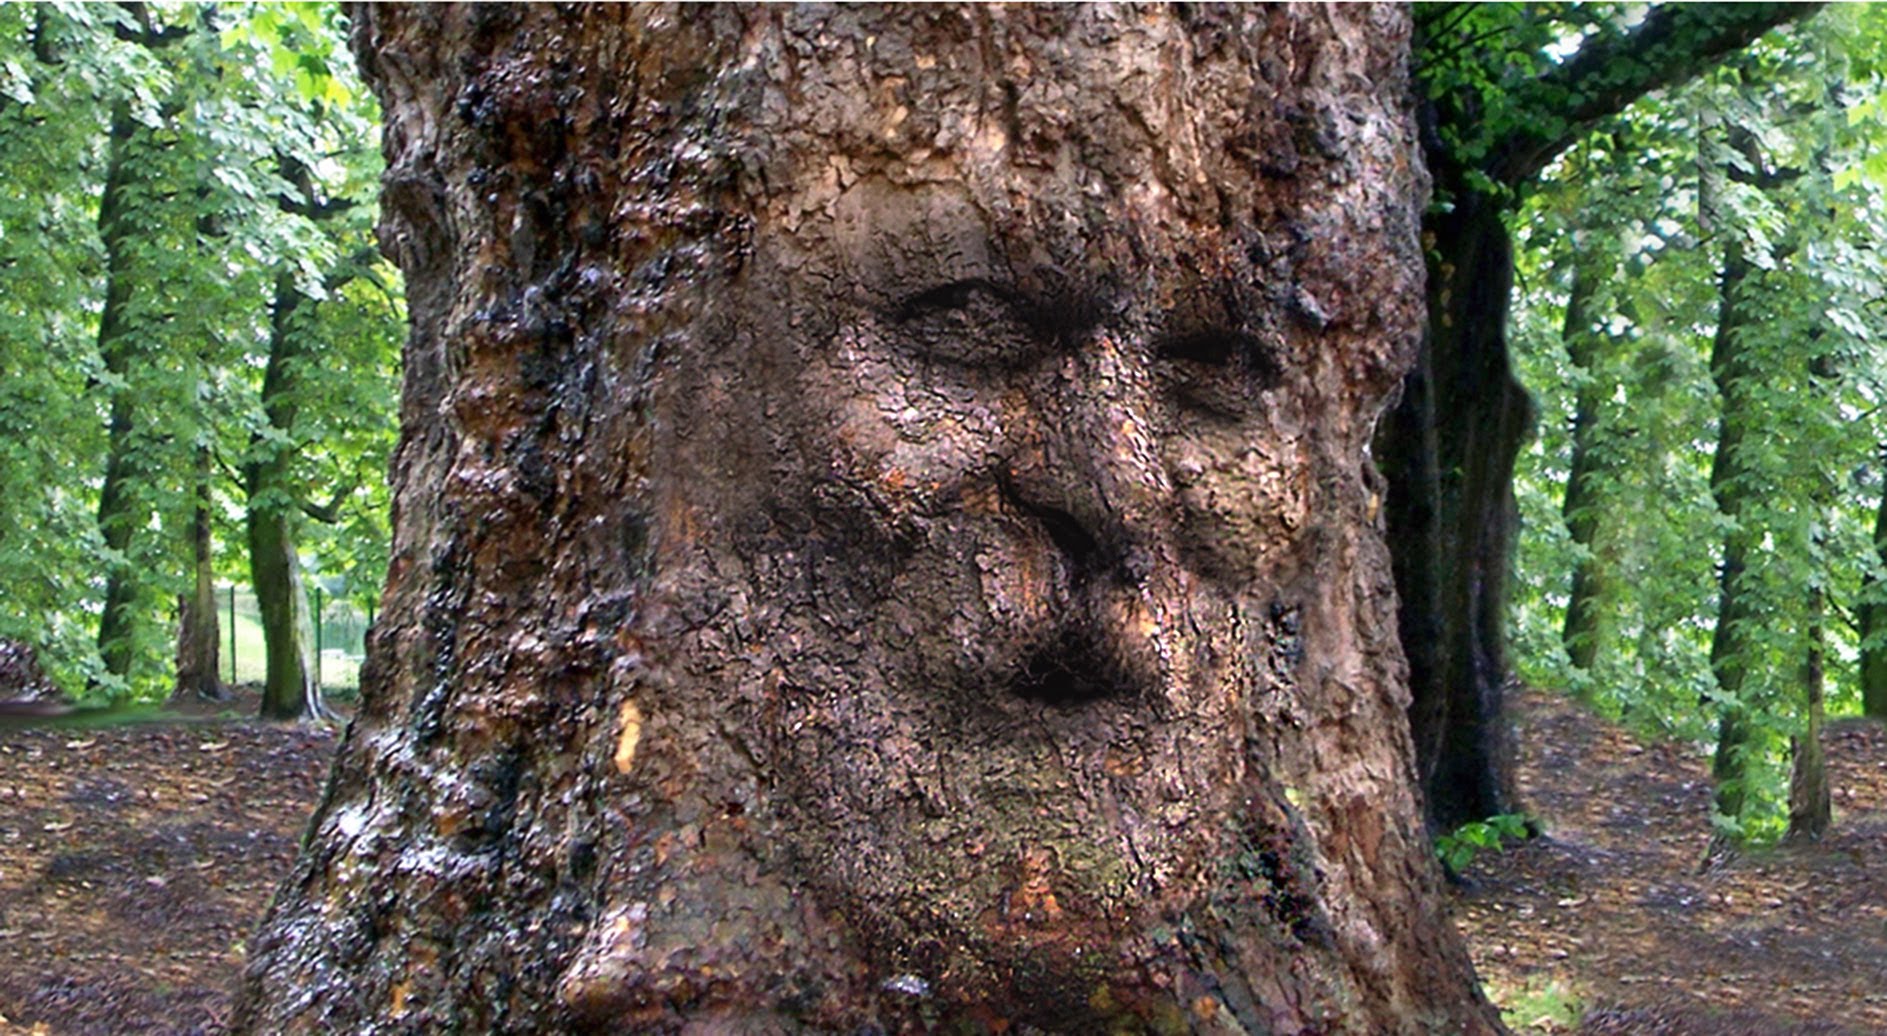 Photoshop Tutorial: How to Camouflage a Face onto Gnarly, TREE Bark ...